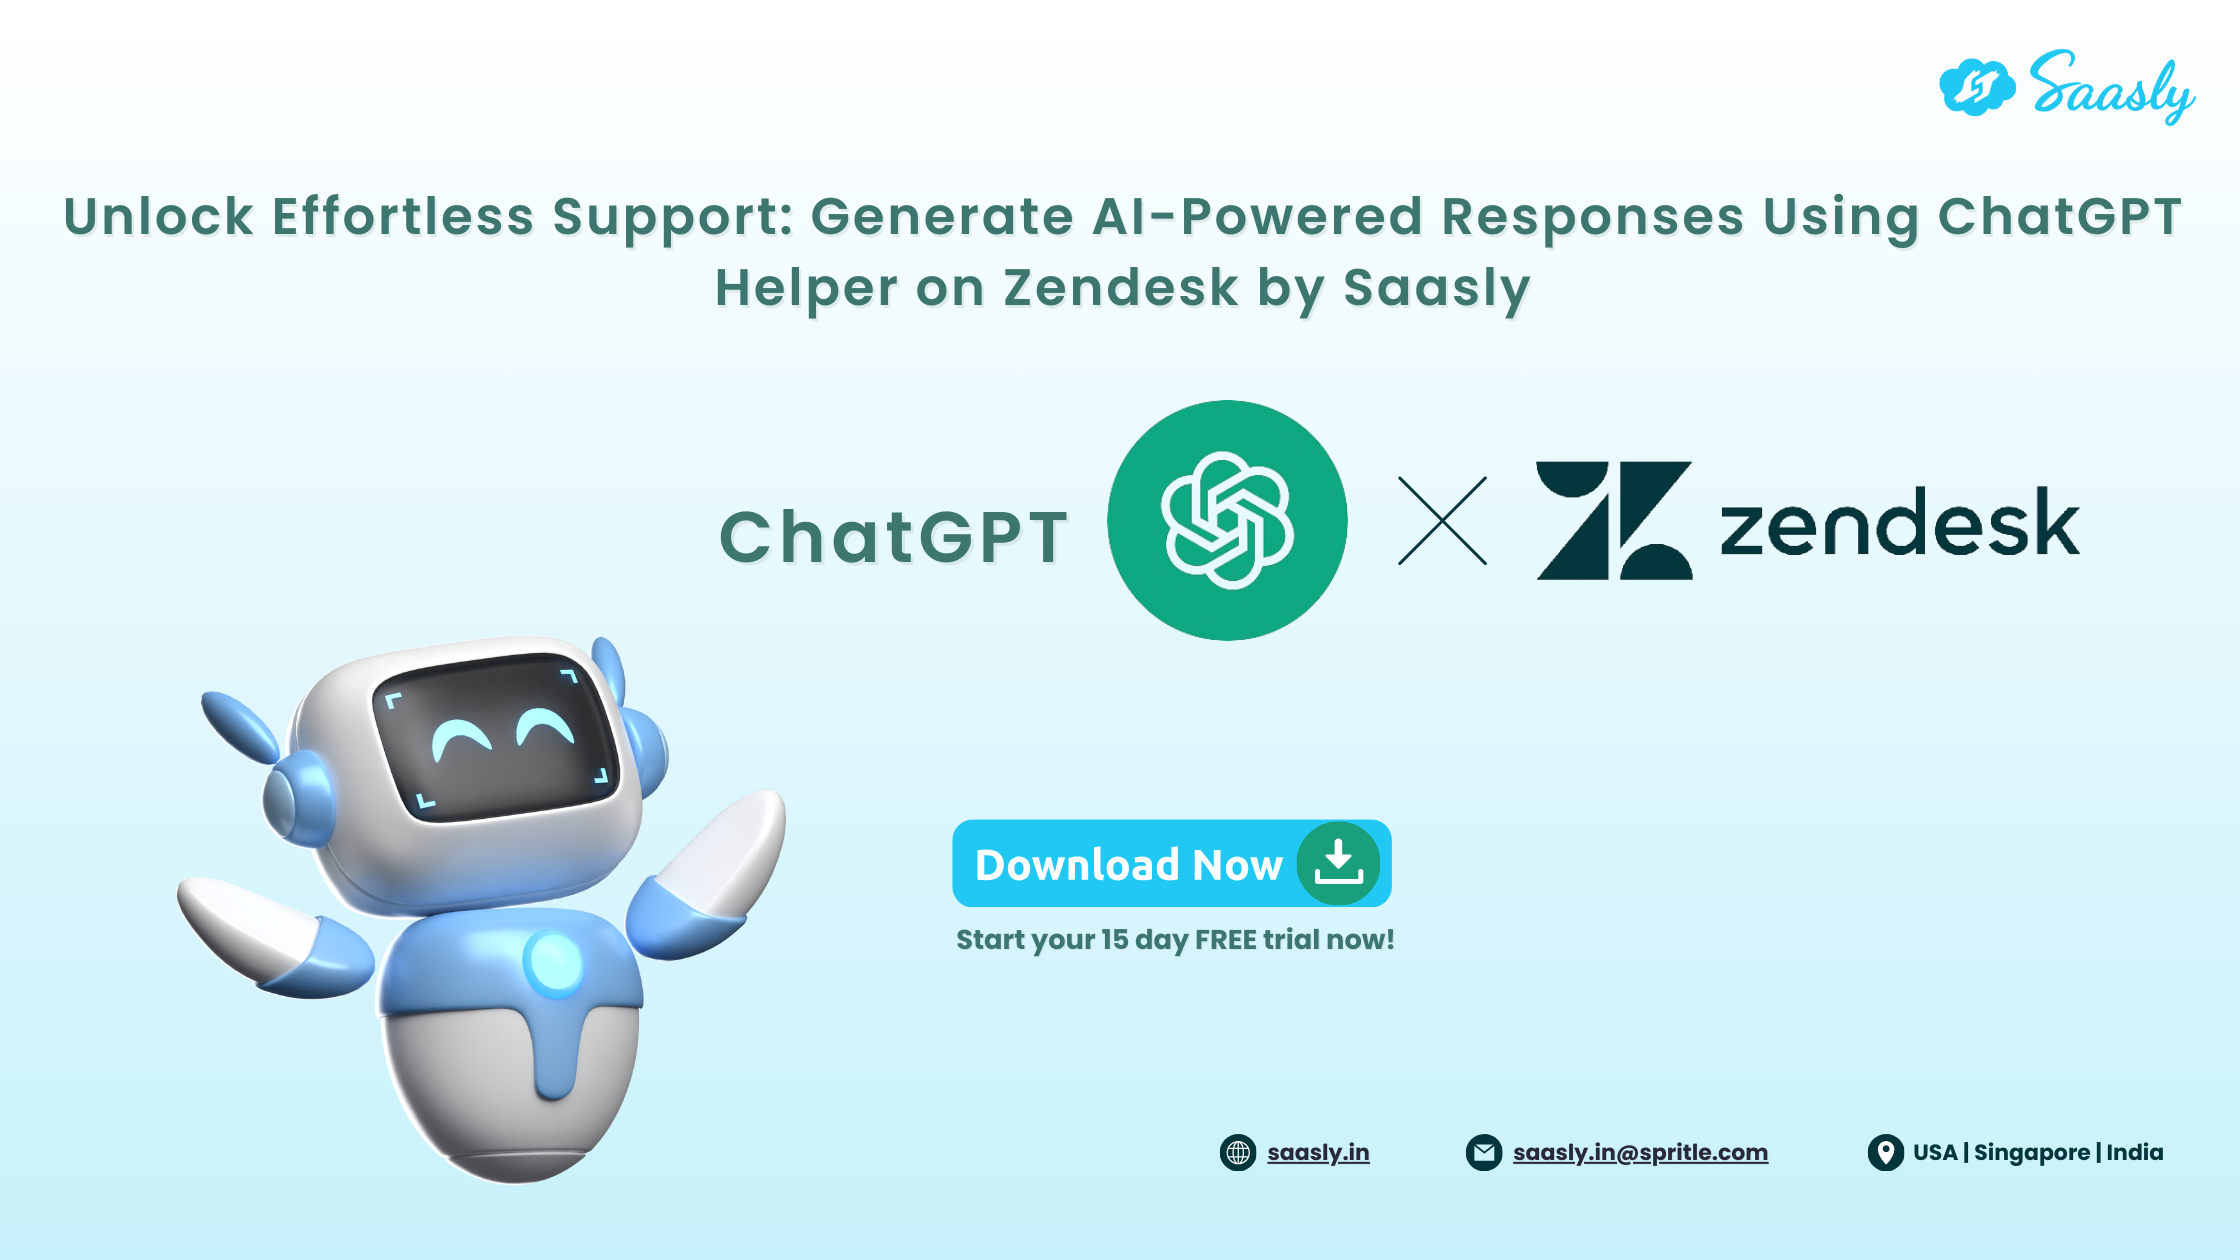 Saasly's ChatGPT Helper on Zendesk: Your Key to Effortless Support!